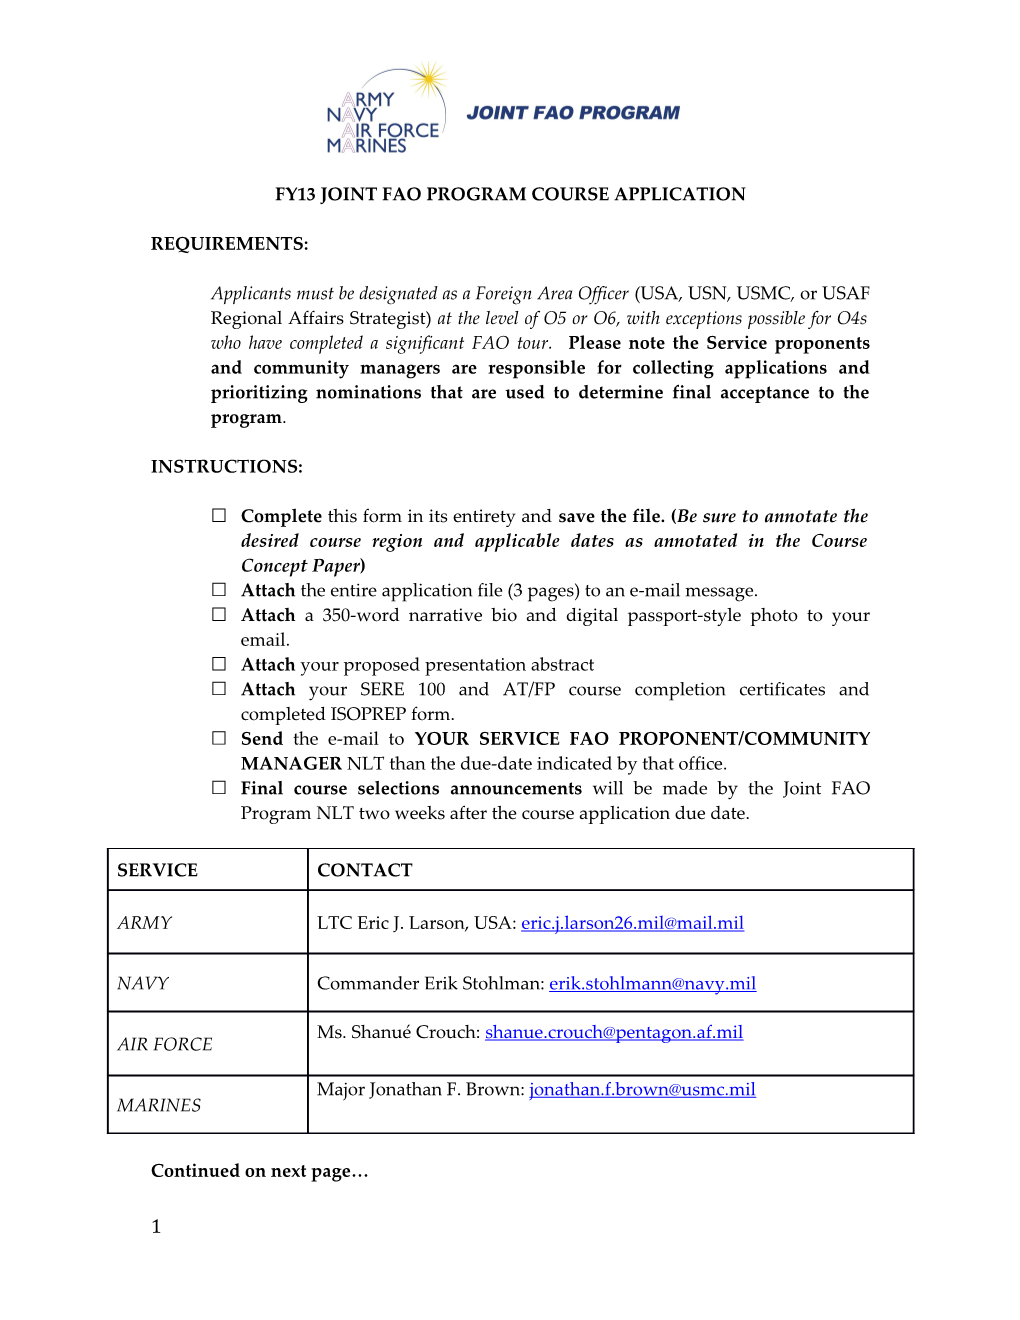 Fy13 Joint Fao Program Course Application